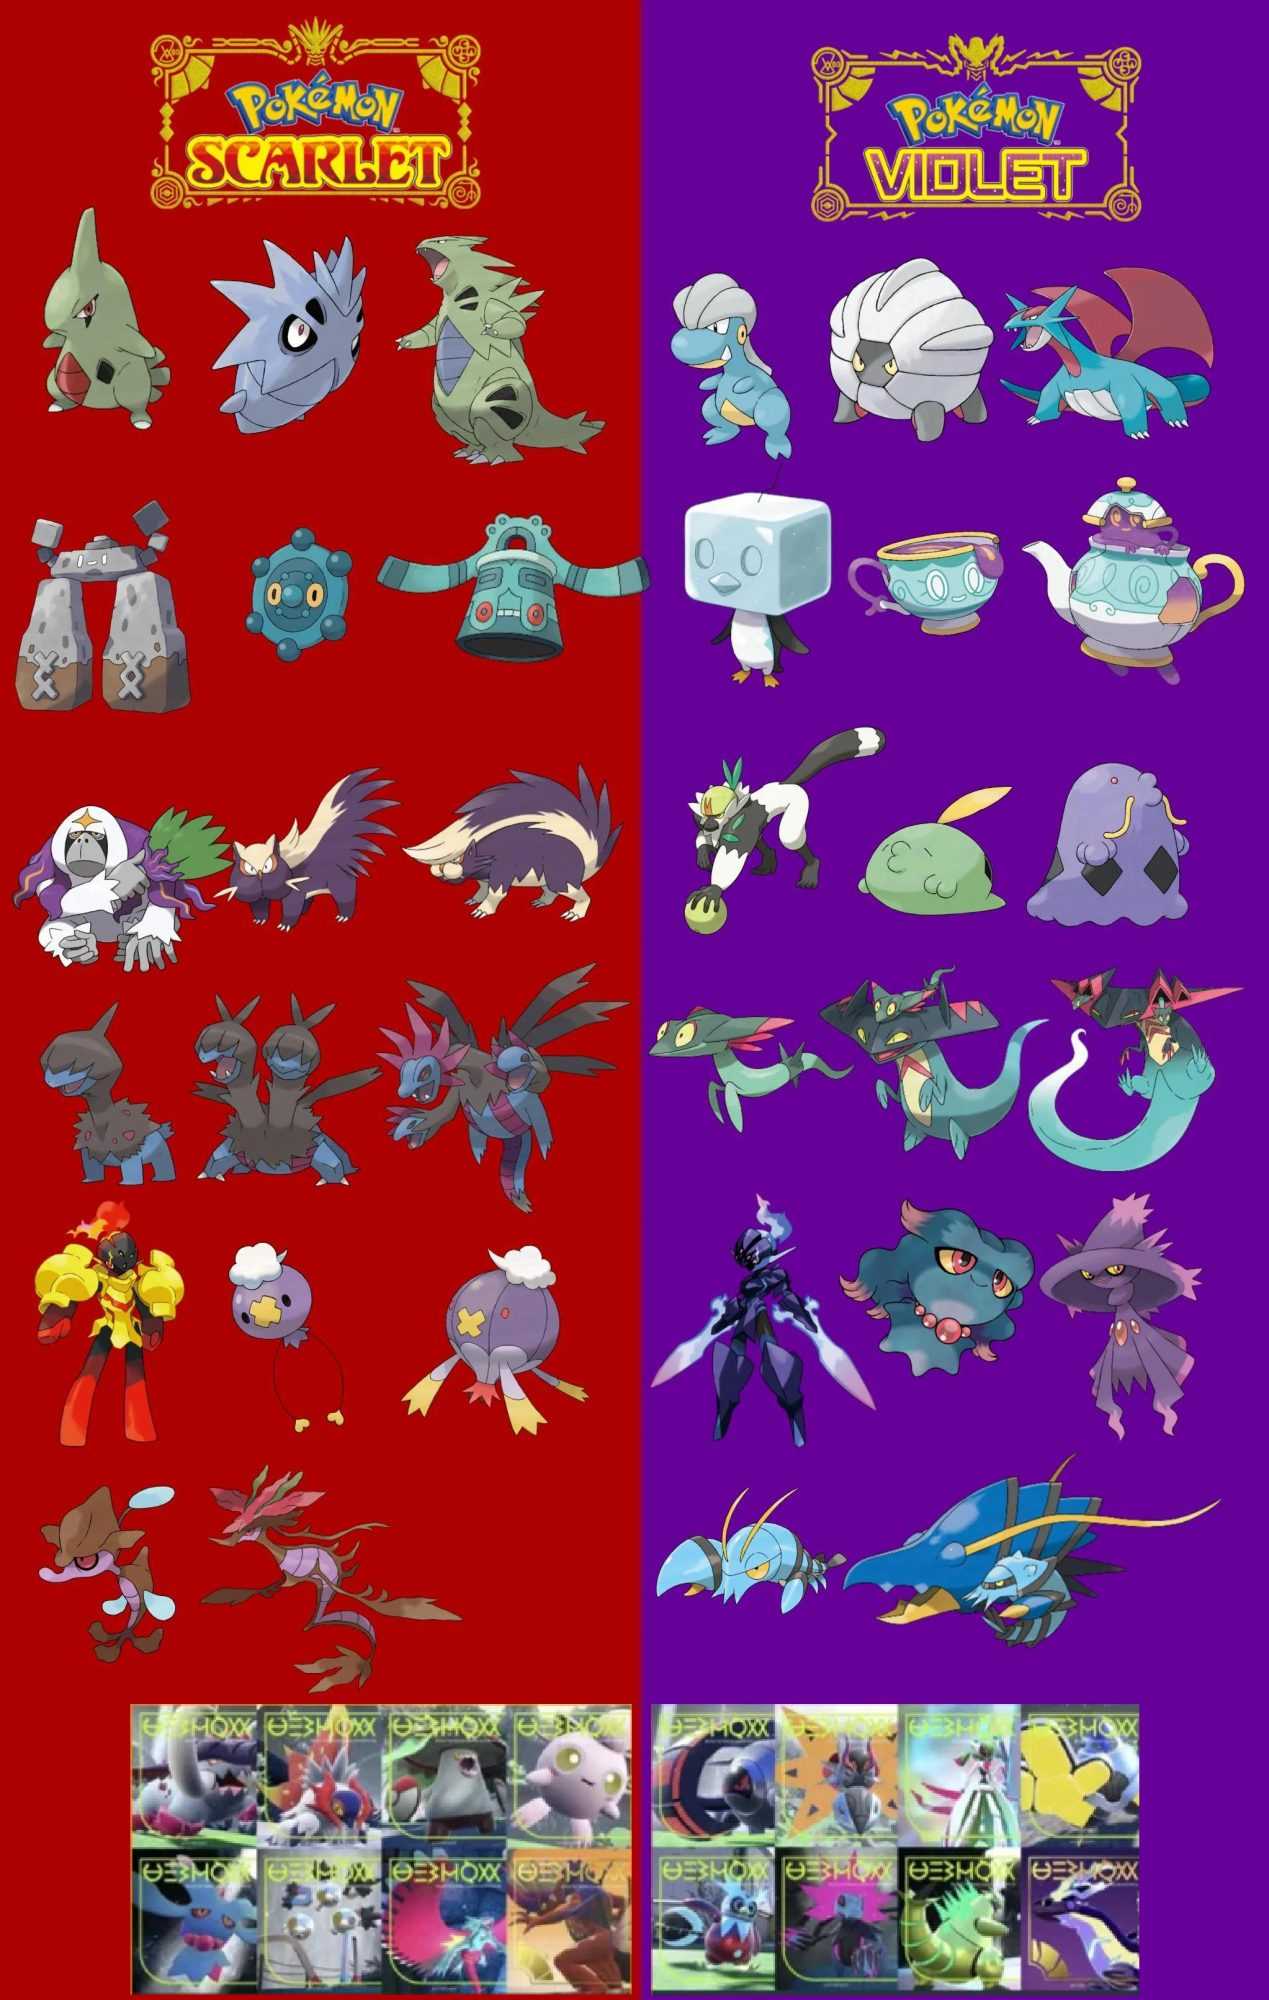 Pokémon Scarlet and Violet: the differences between the two versions